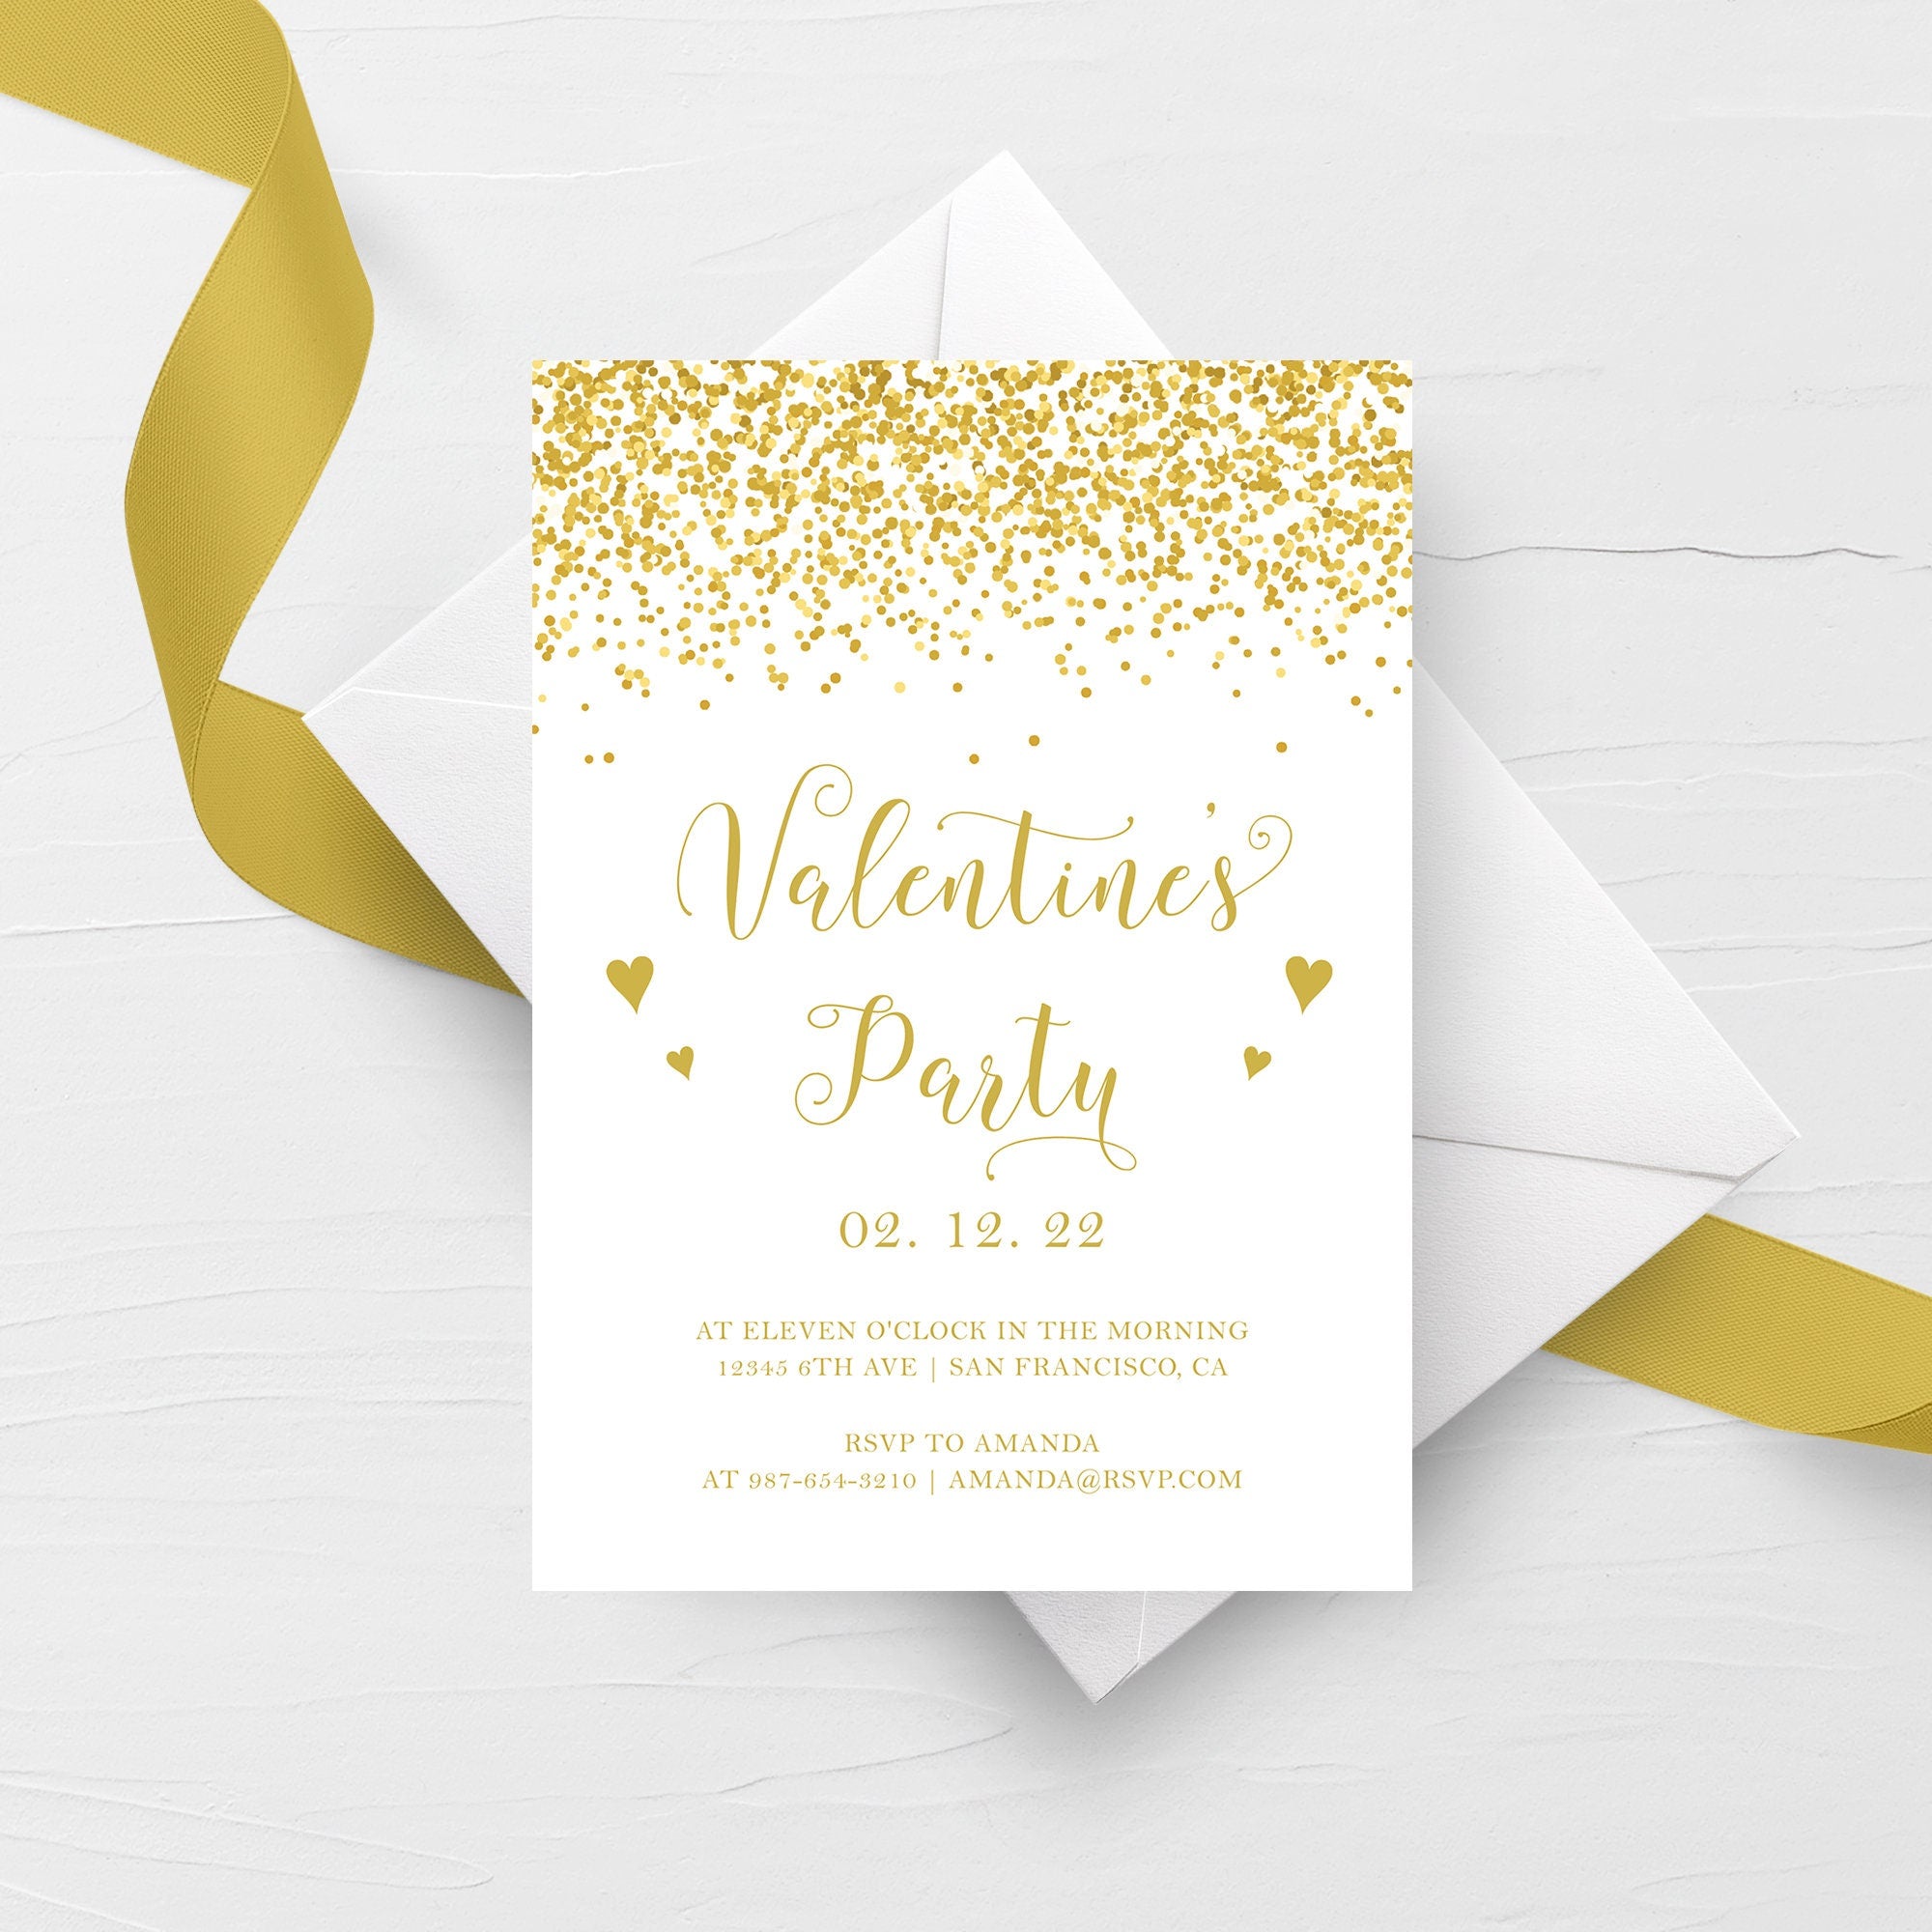 Valentines Day Party Invite Template, Valentines Brunch Invitation, Printable Valentine Party Invitation, INSTANT DOWNLOAD V100